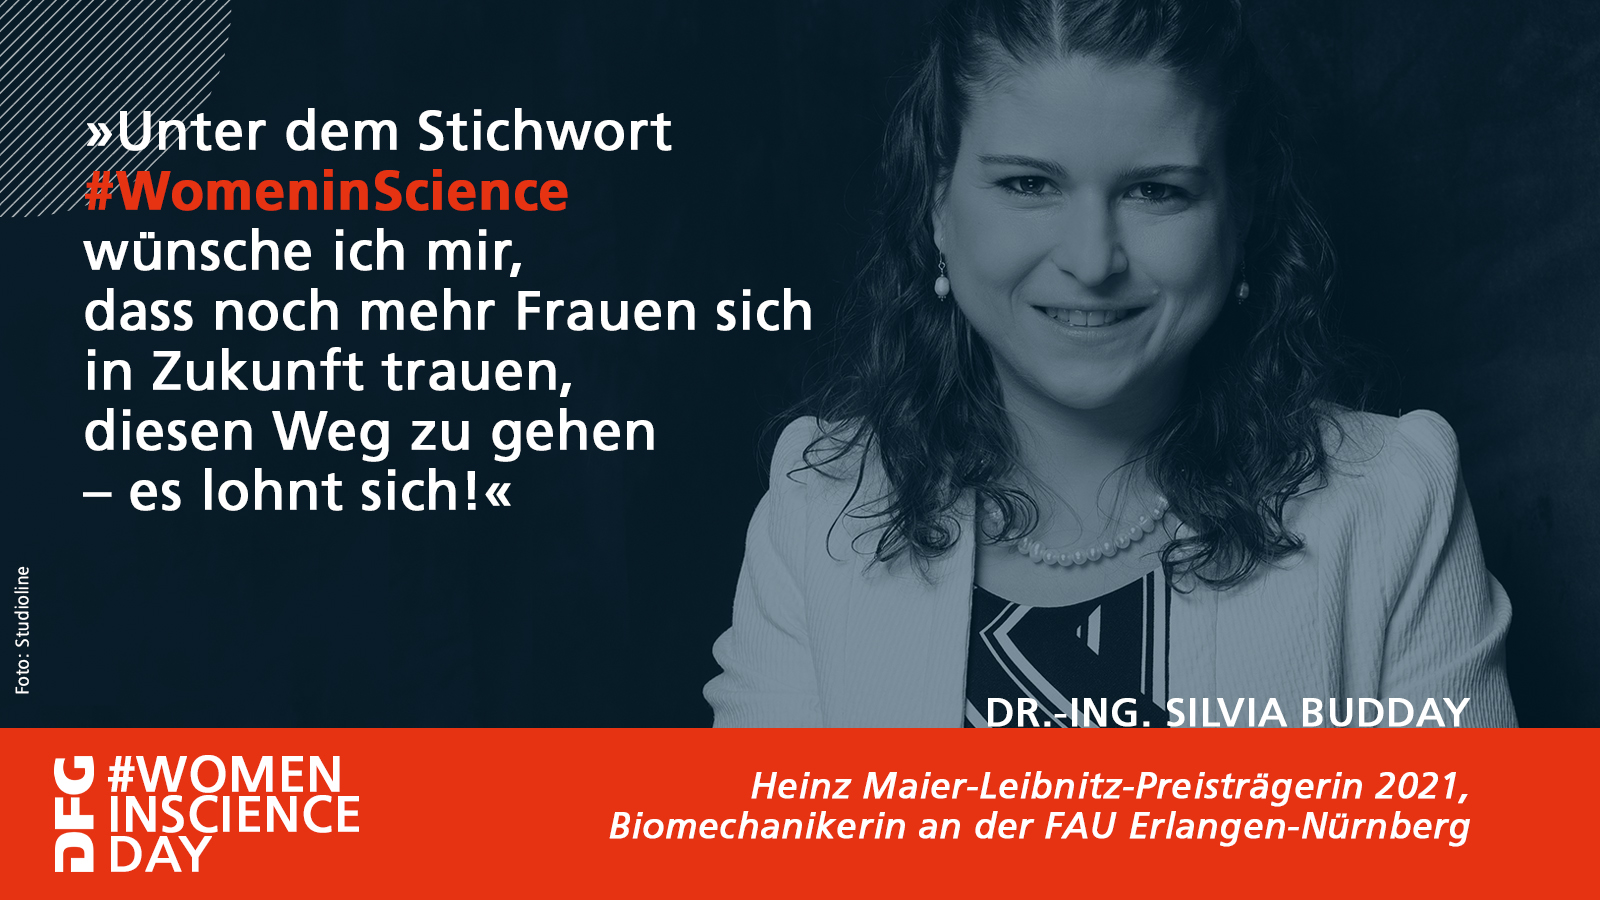 Statement Dr.-Ing. Silvia Budday